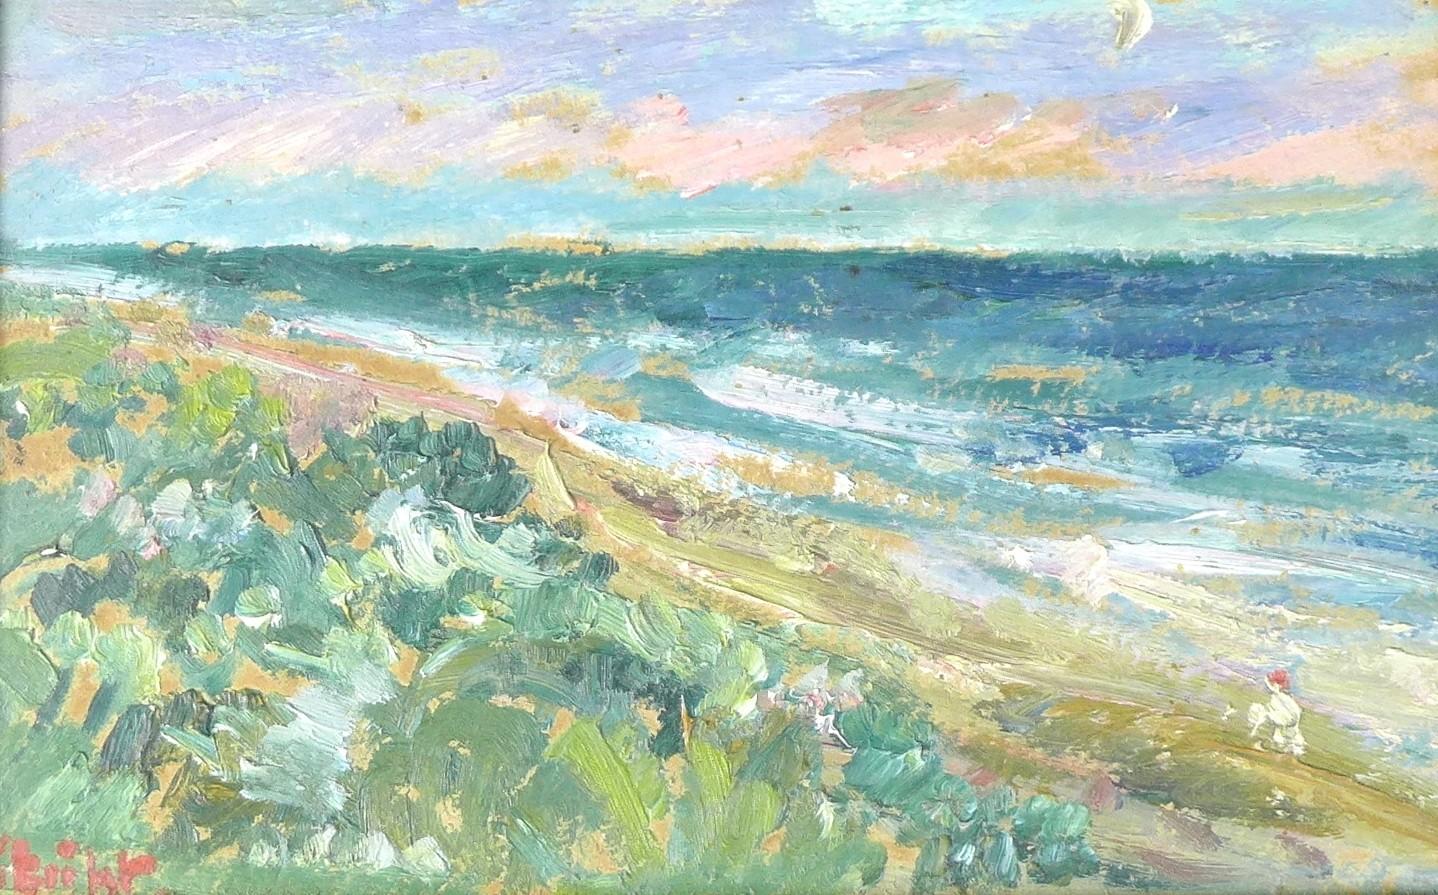 Danish School (20th century): two impressionistic coastal scene paintings, an oil on canvas of a